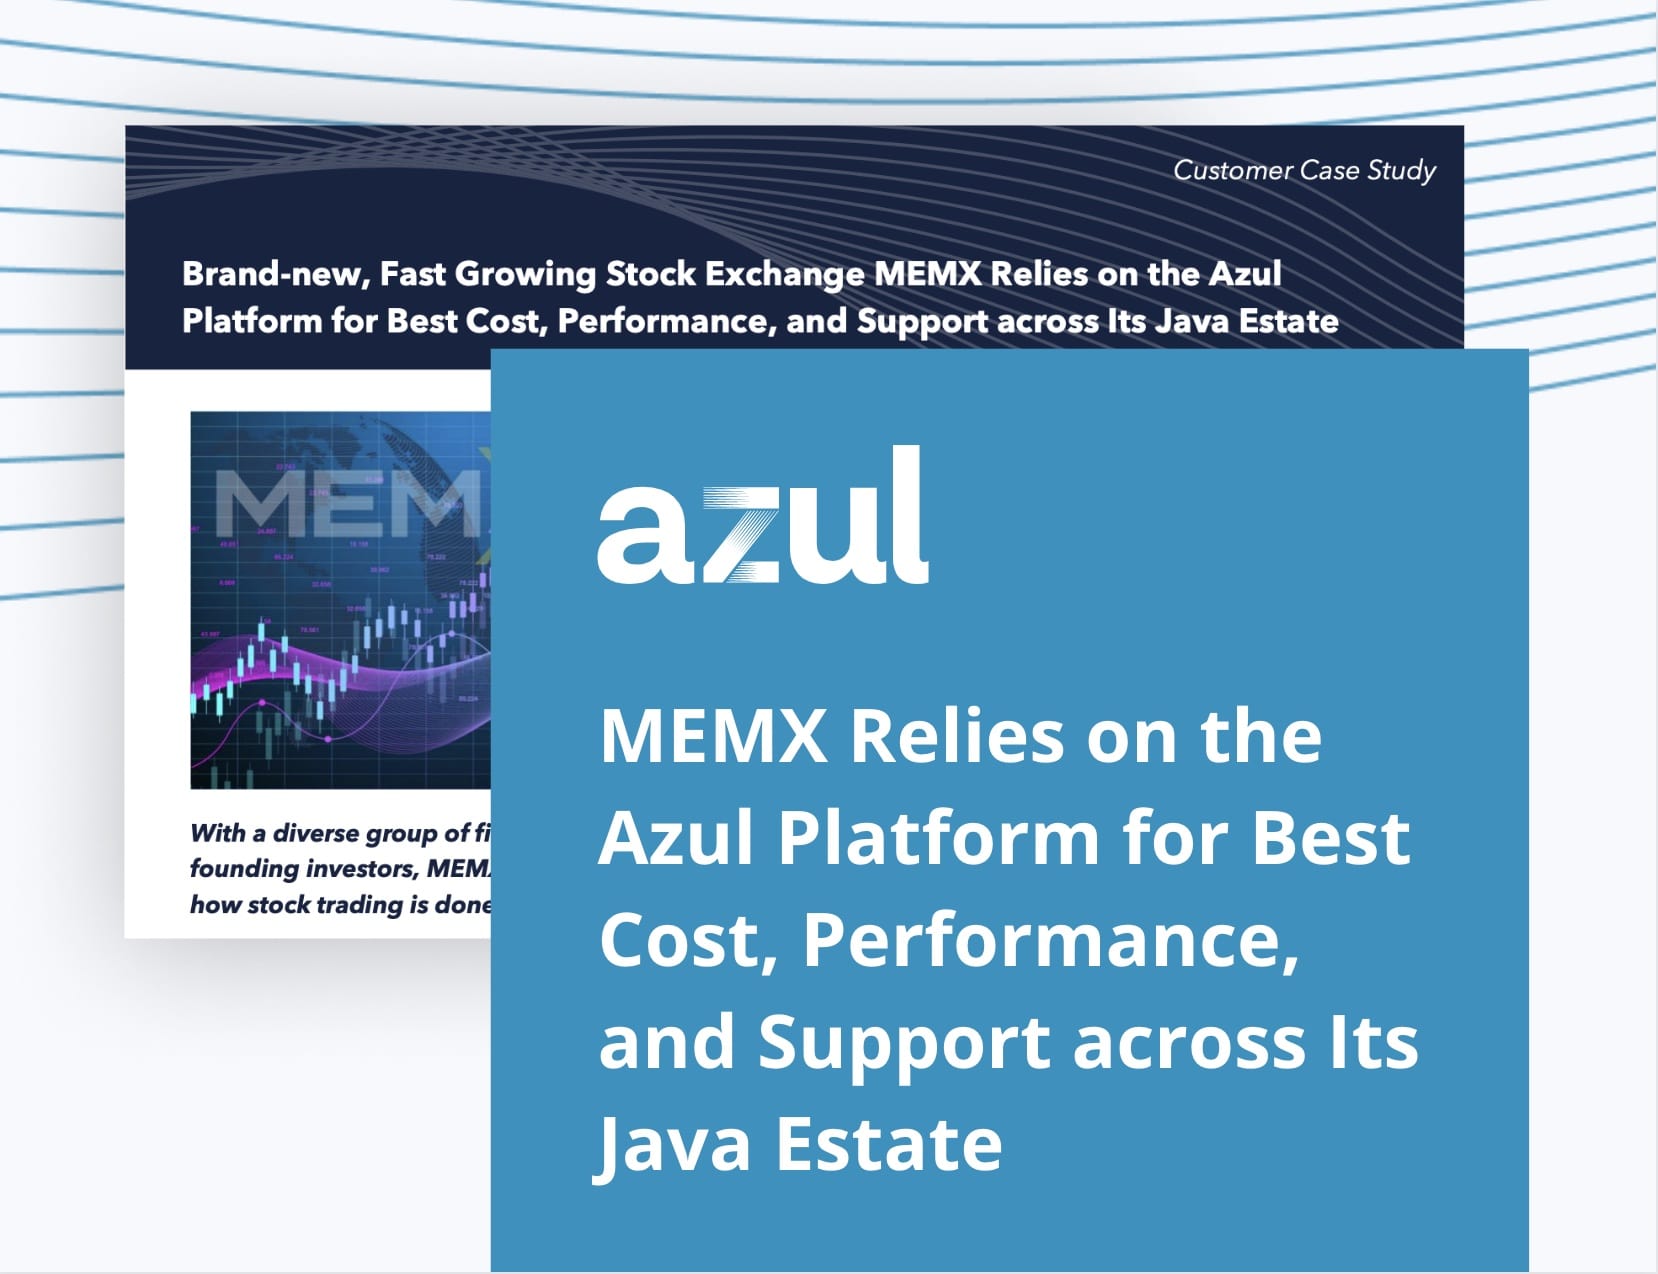 MEMX Relies on the Azul Platform for Best Cost, Performance, and Support across Its Java Estate